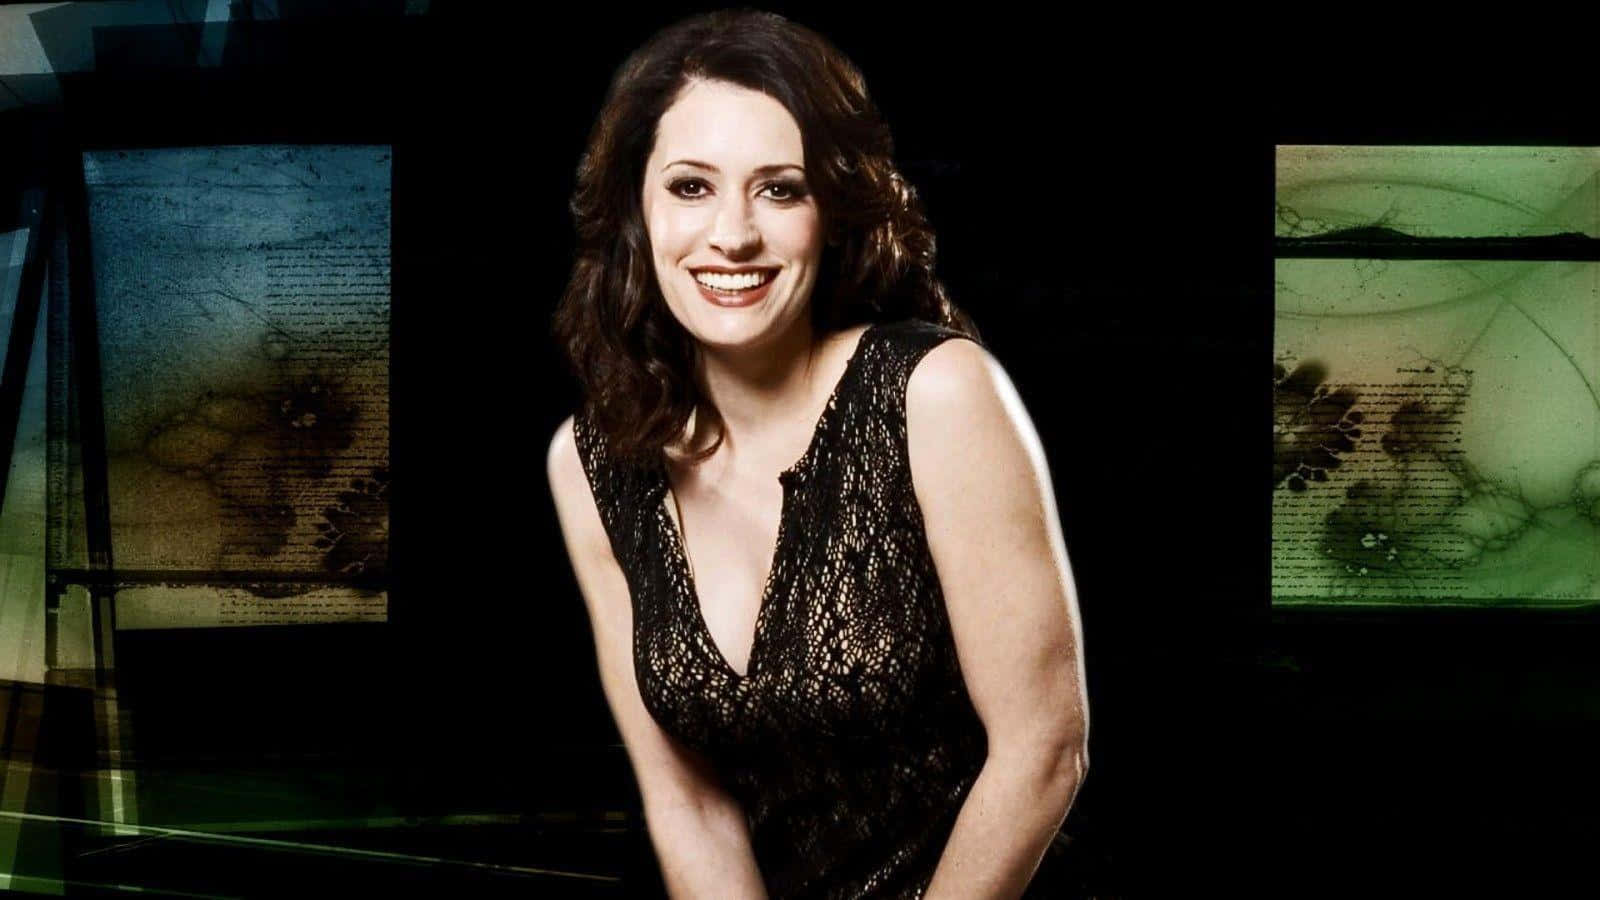 Paget Brewster Posing For A Photoshoot Background